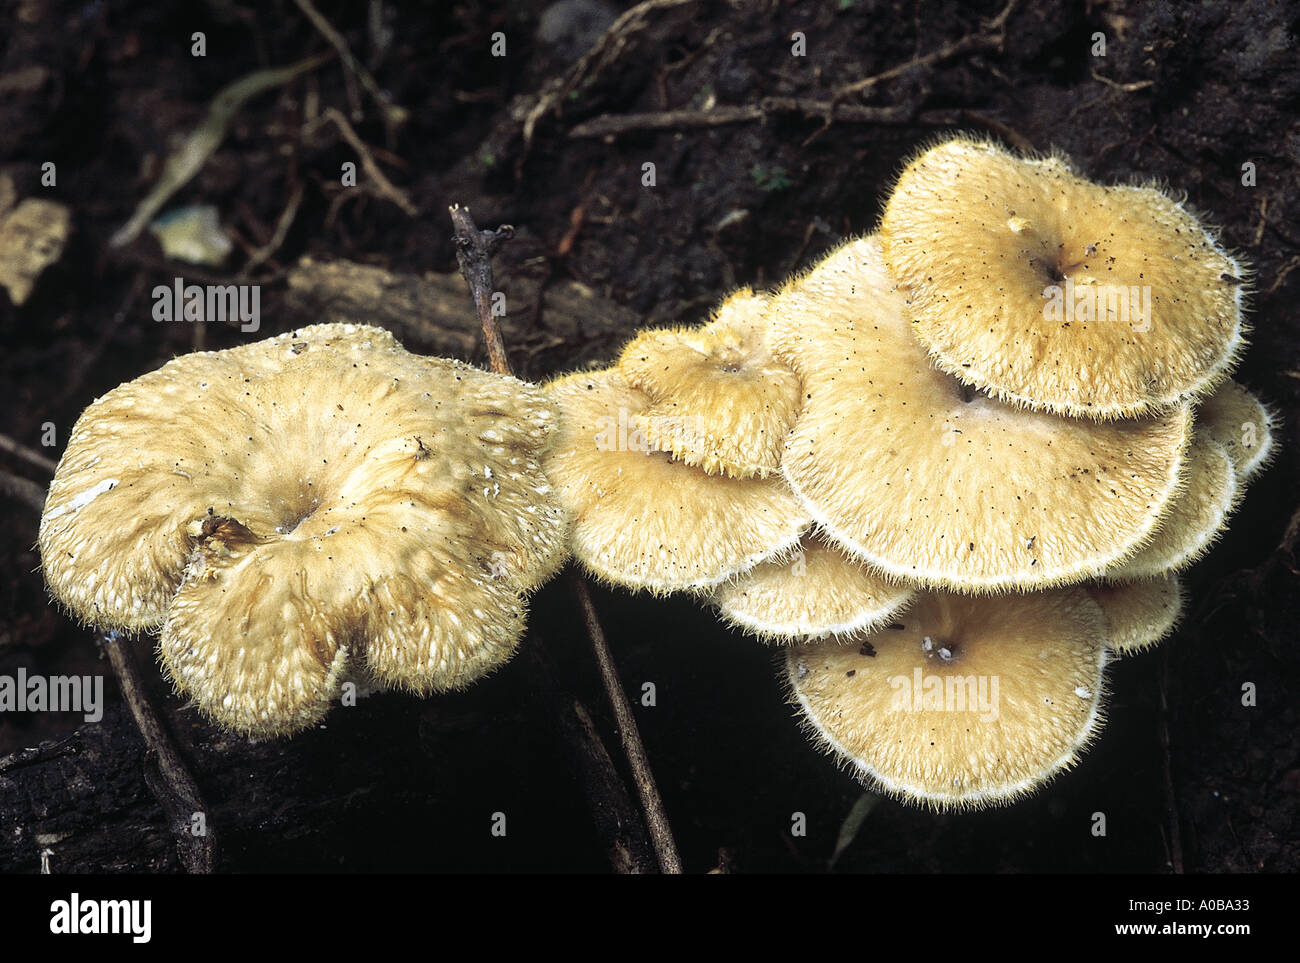 Favolus sp Class Homobasidiomycetes Series Hymenomycetes Order Aphyllophorales A soft slightly leathery fungus with hexagonal Stock Photo